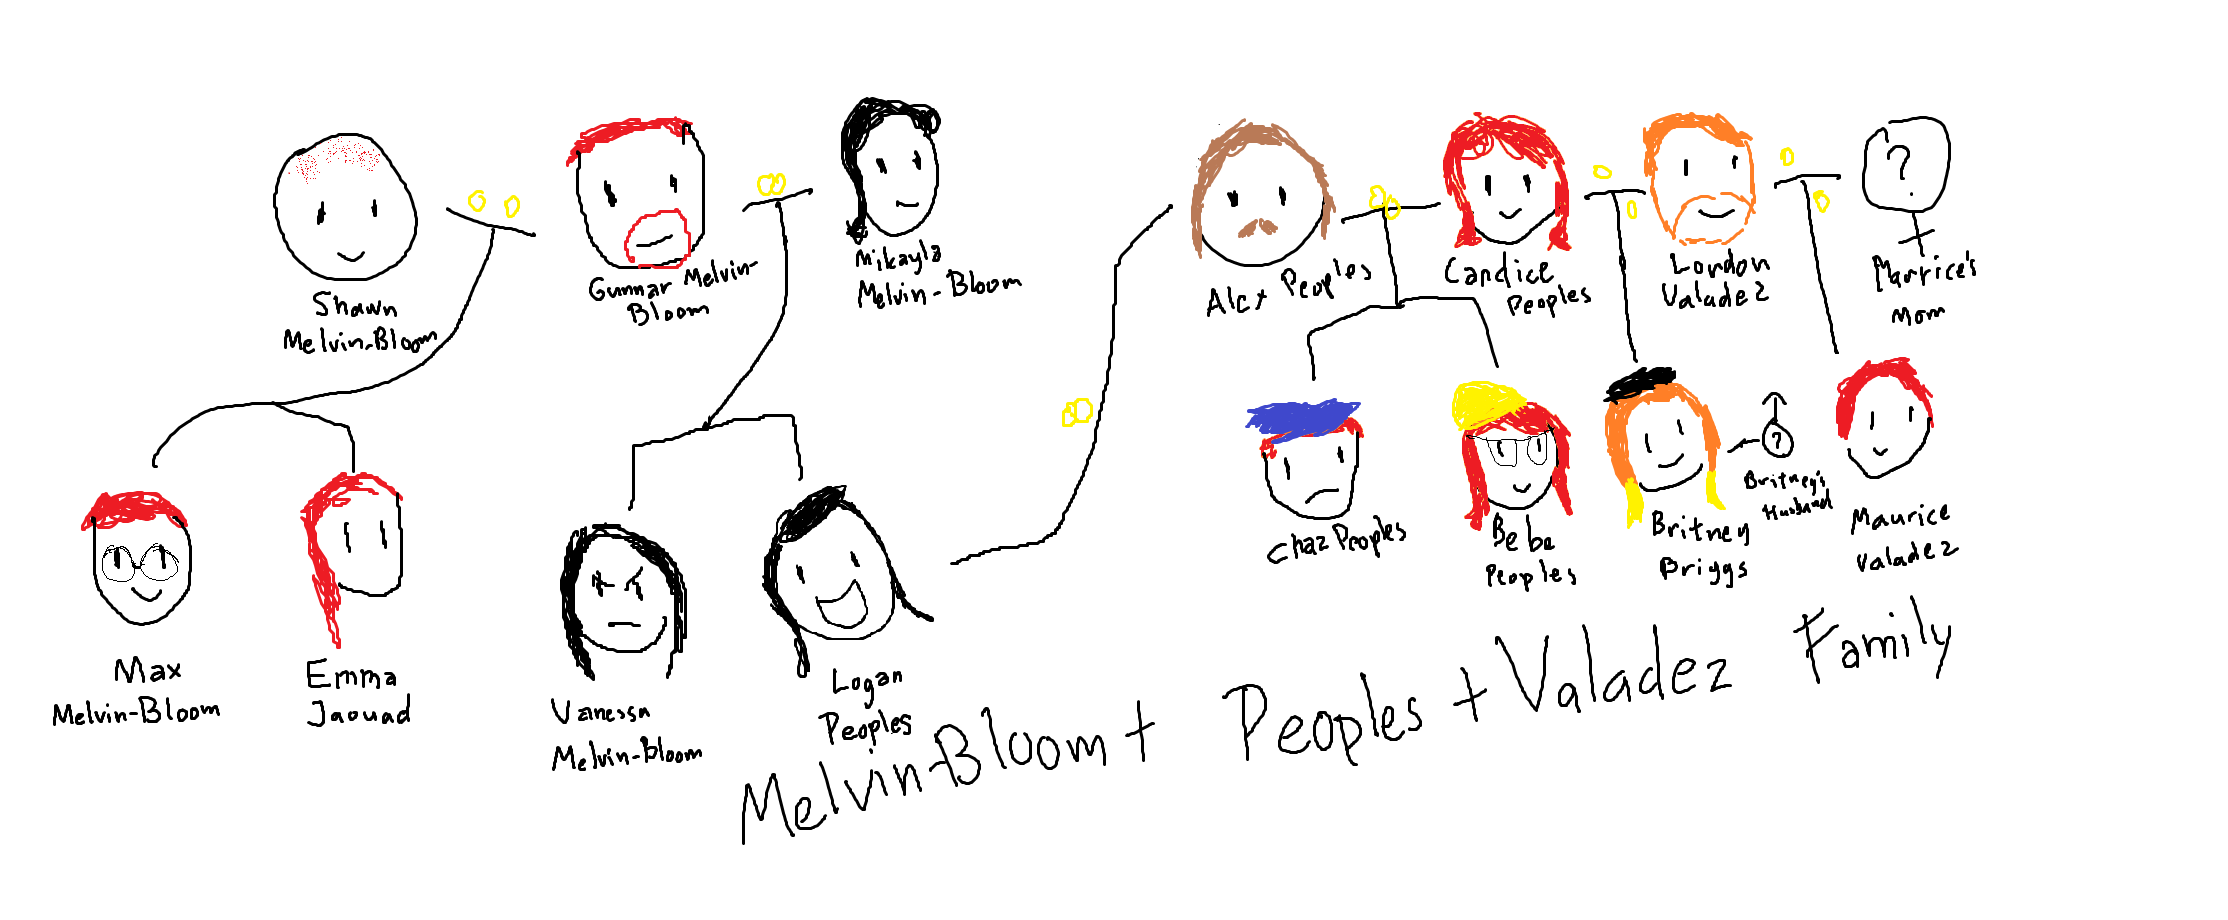 melvin-bloom-peoples-valadez-family.png